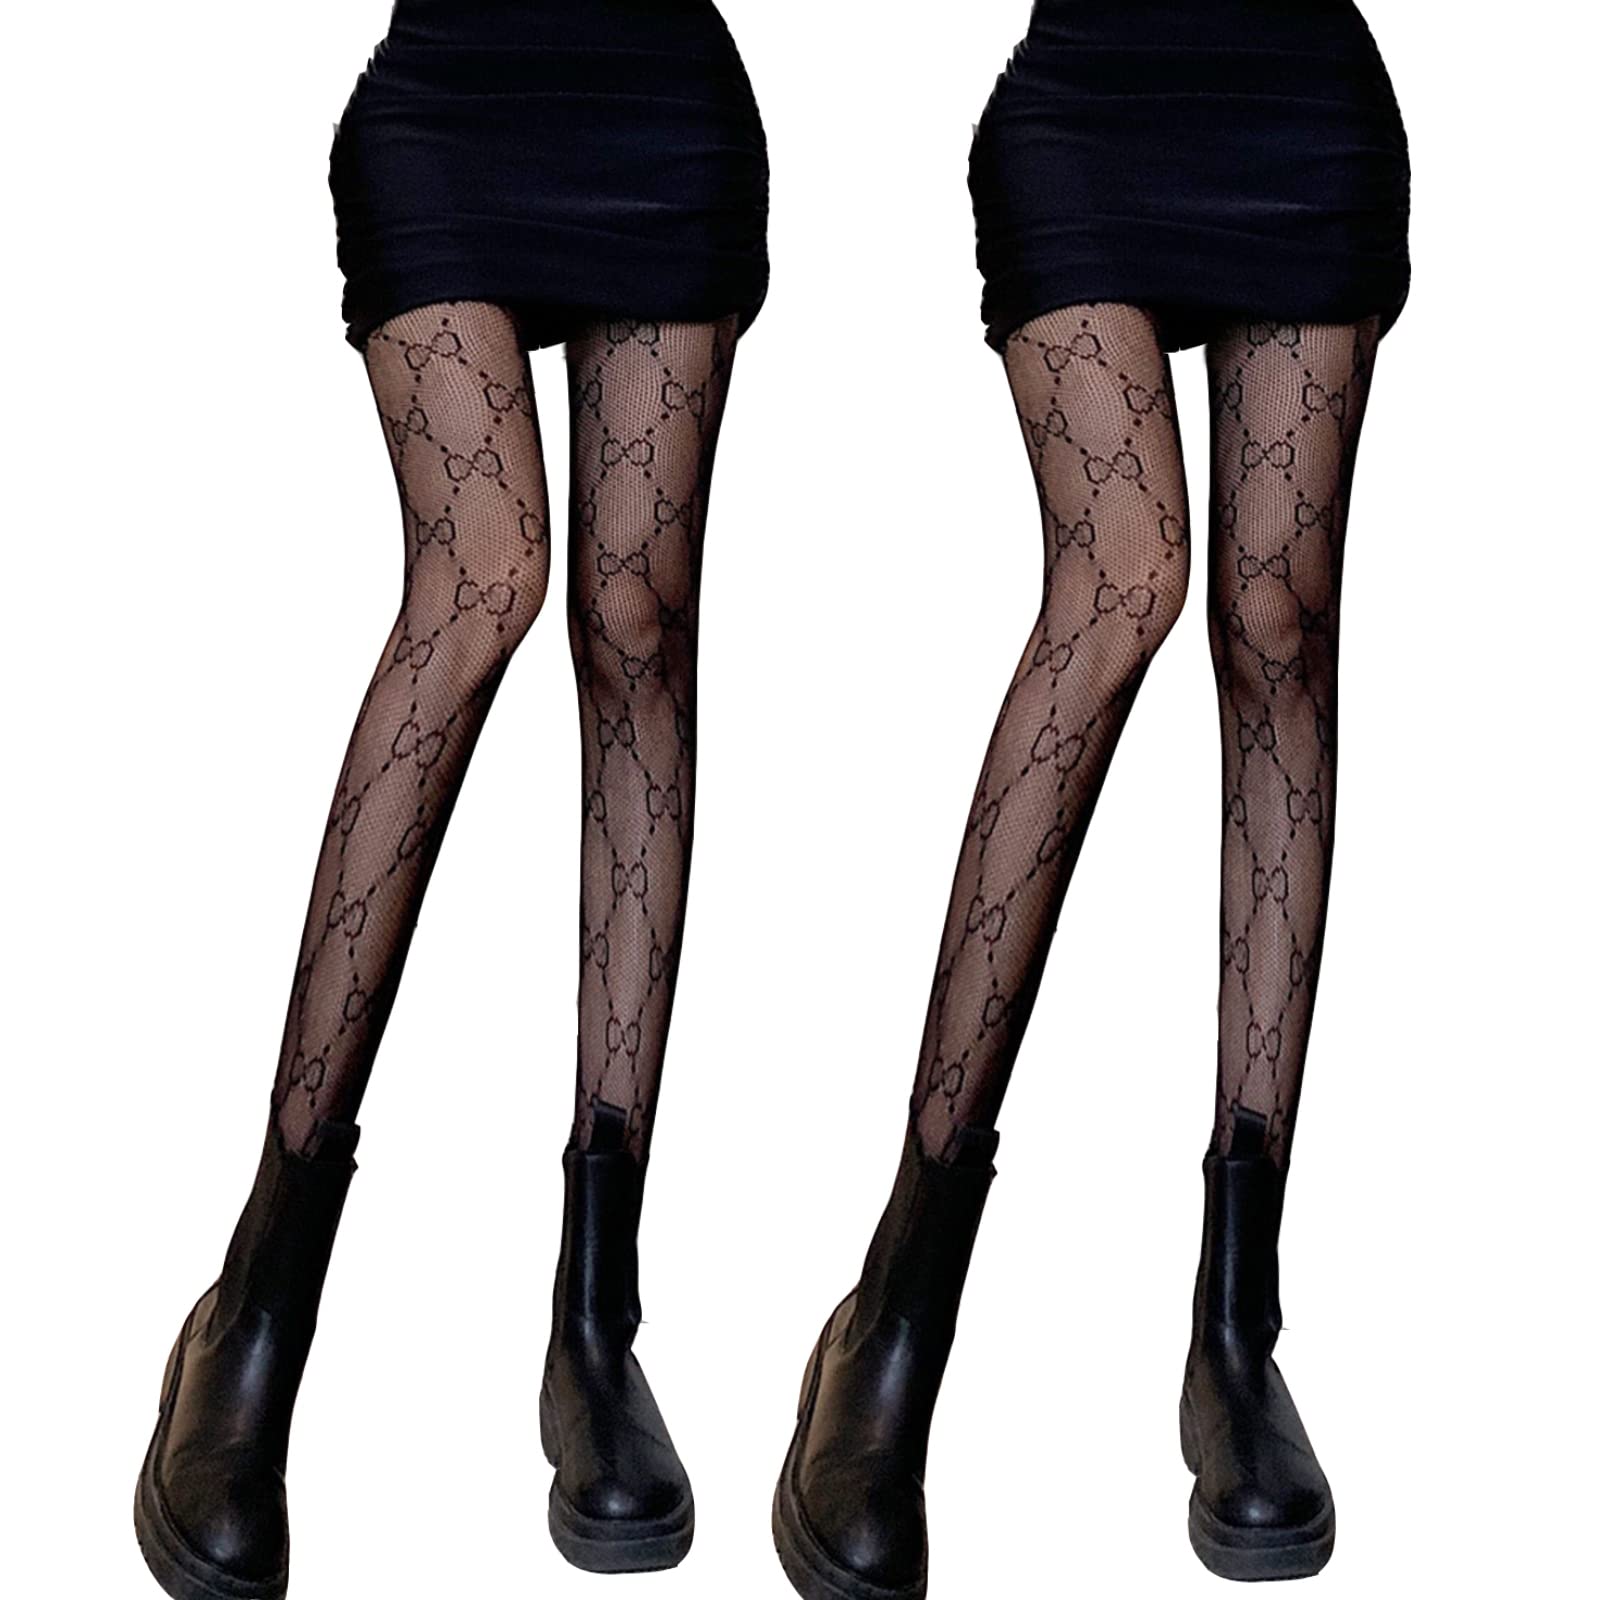 Echpzed Women Patterend Fishnet Tights High Waist Fashion Stockings Pantyhose for Party, 2 Pairs